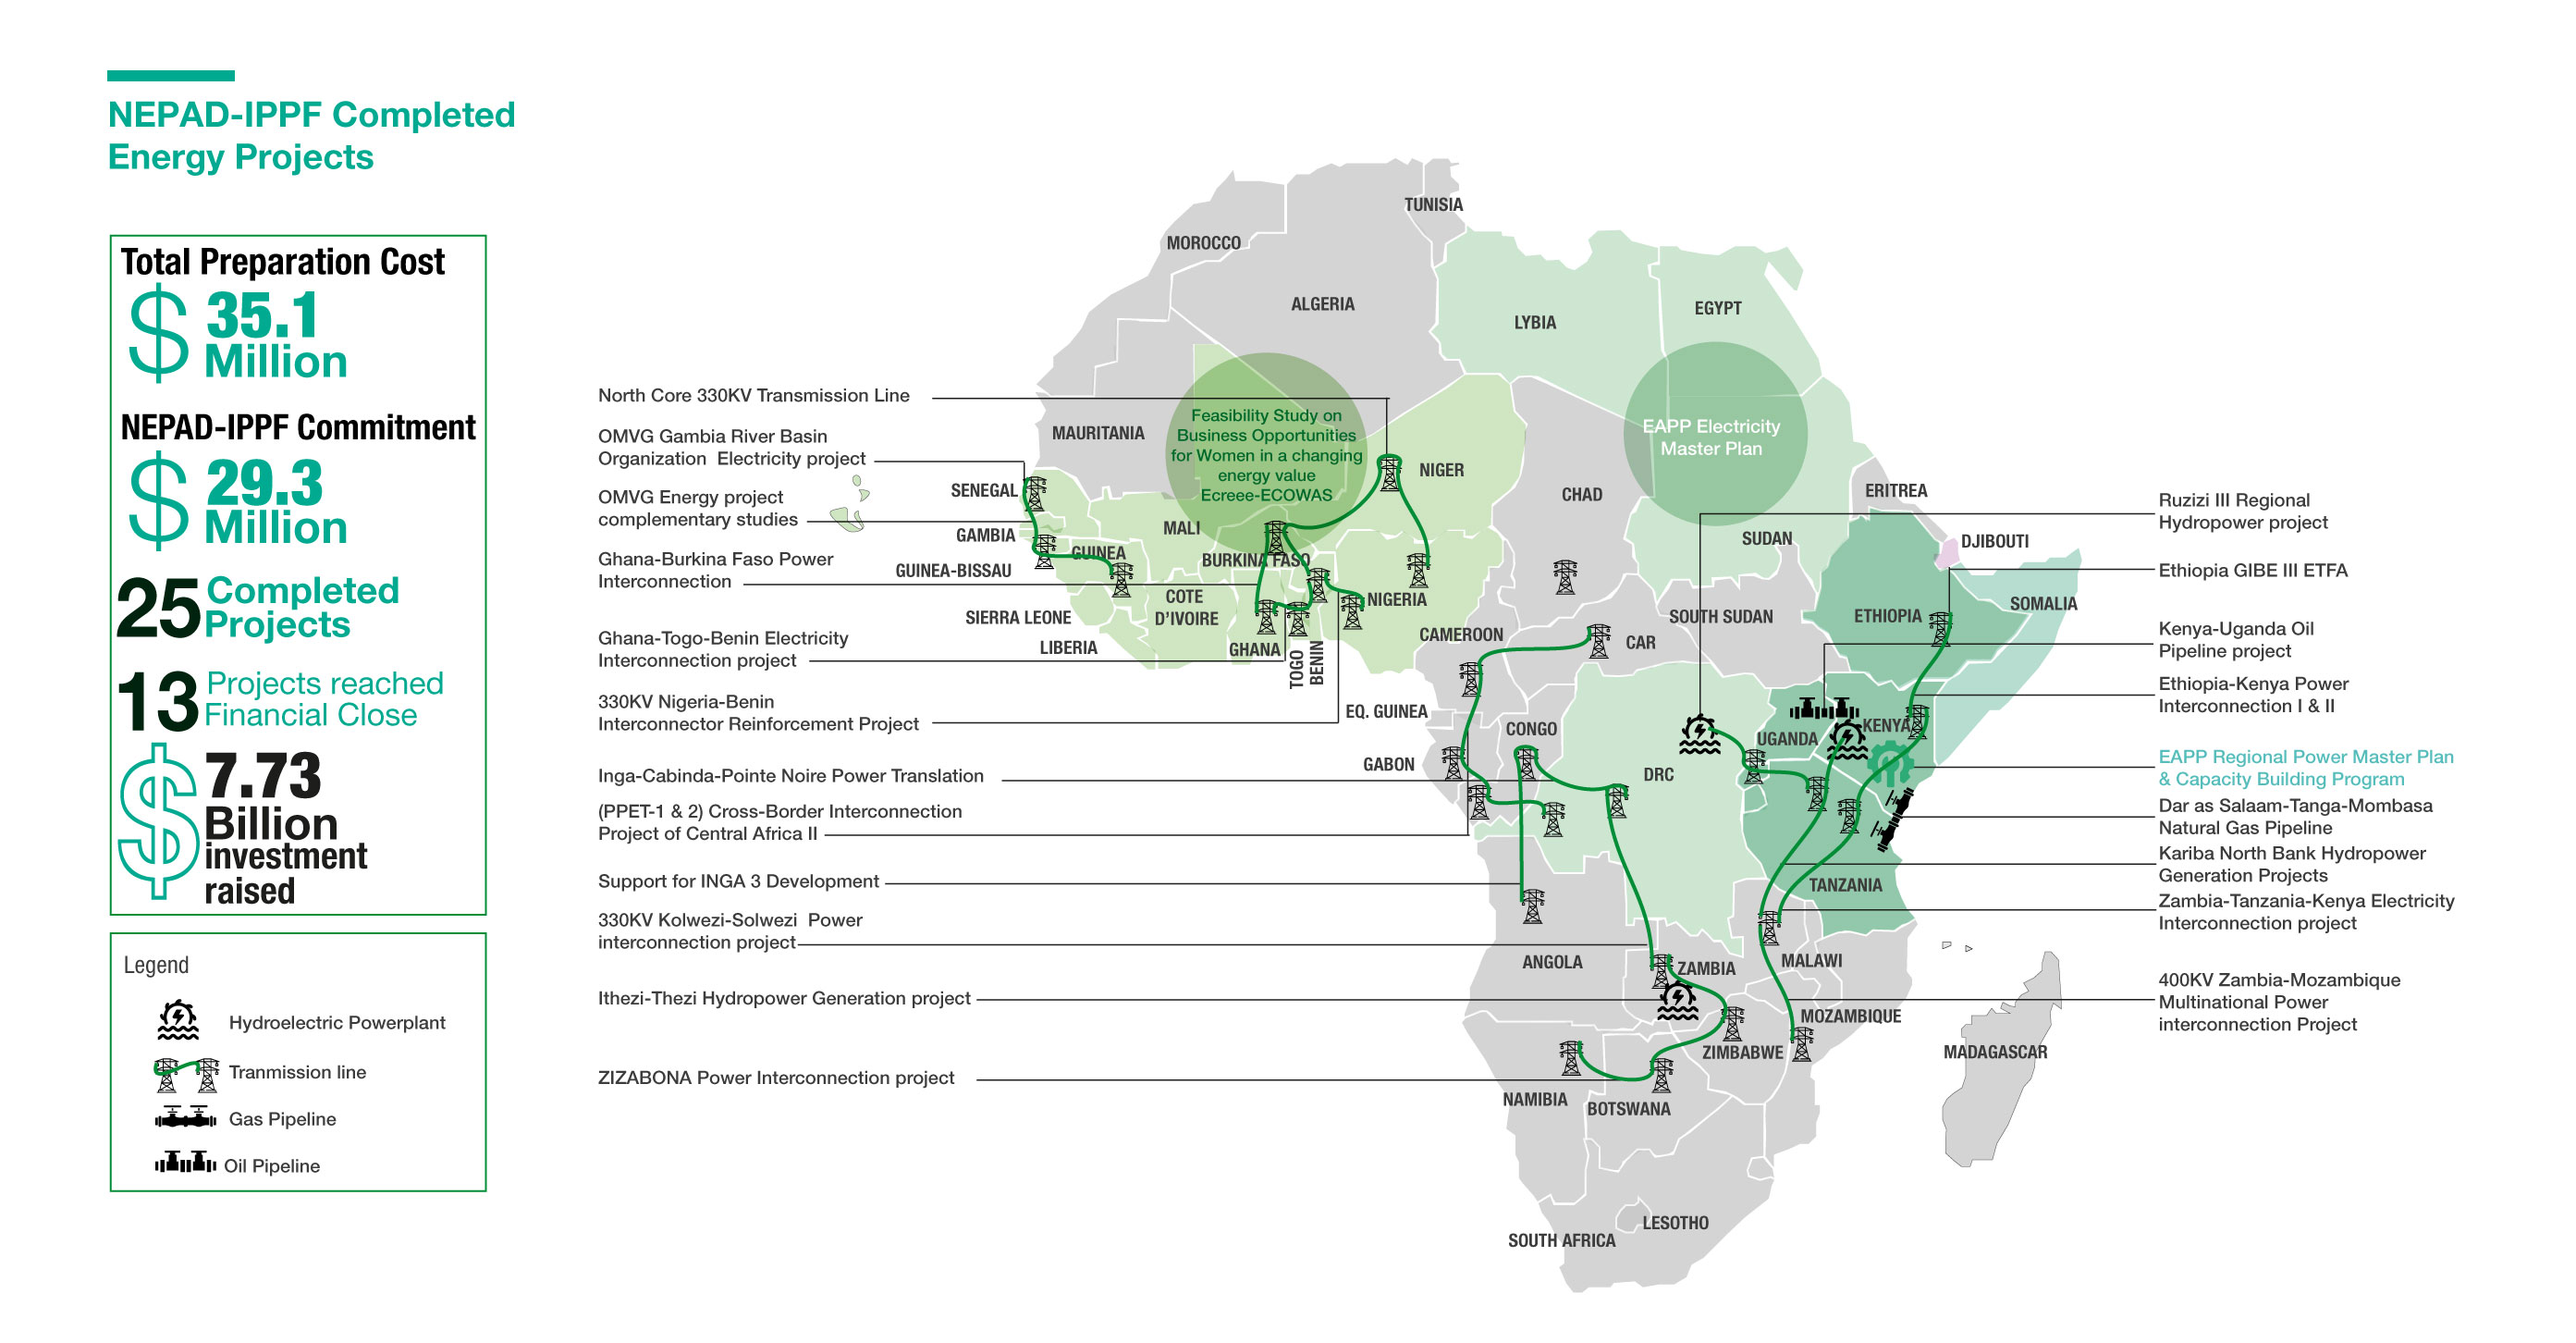 NEPAD-IPPF Completed Energy Projects